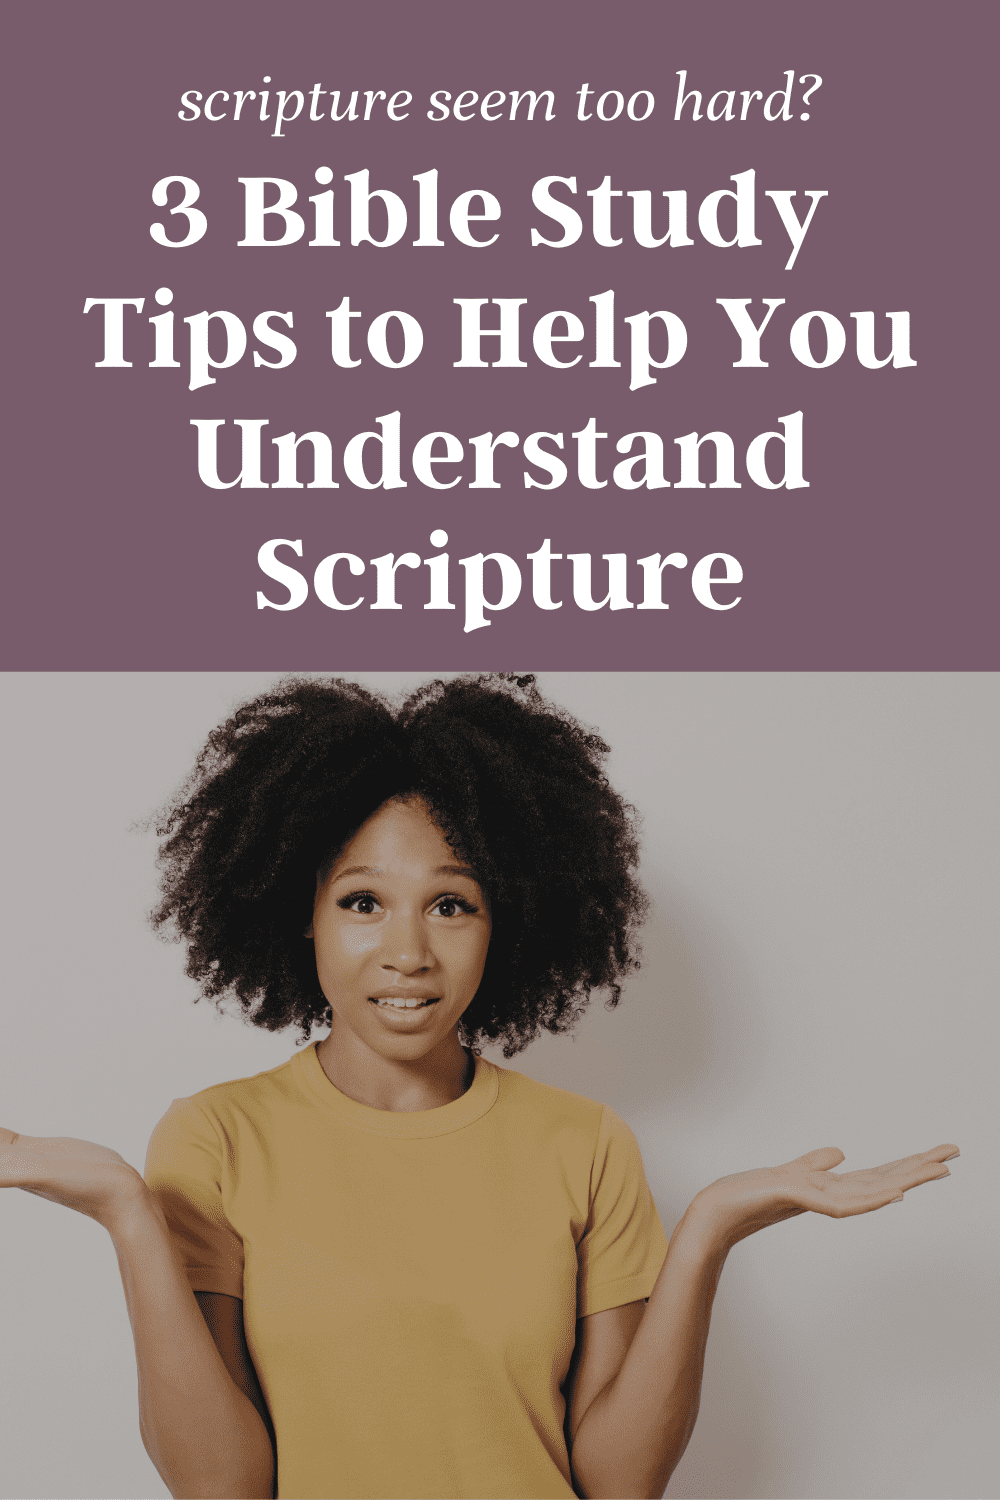 If you are struggling to understand scripture or retain biblical truths when you sit down for bible study these tips will help you. Learn how to troubleshoot your current bible study routine plus get suggestions on things to change.